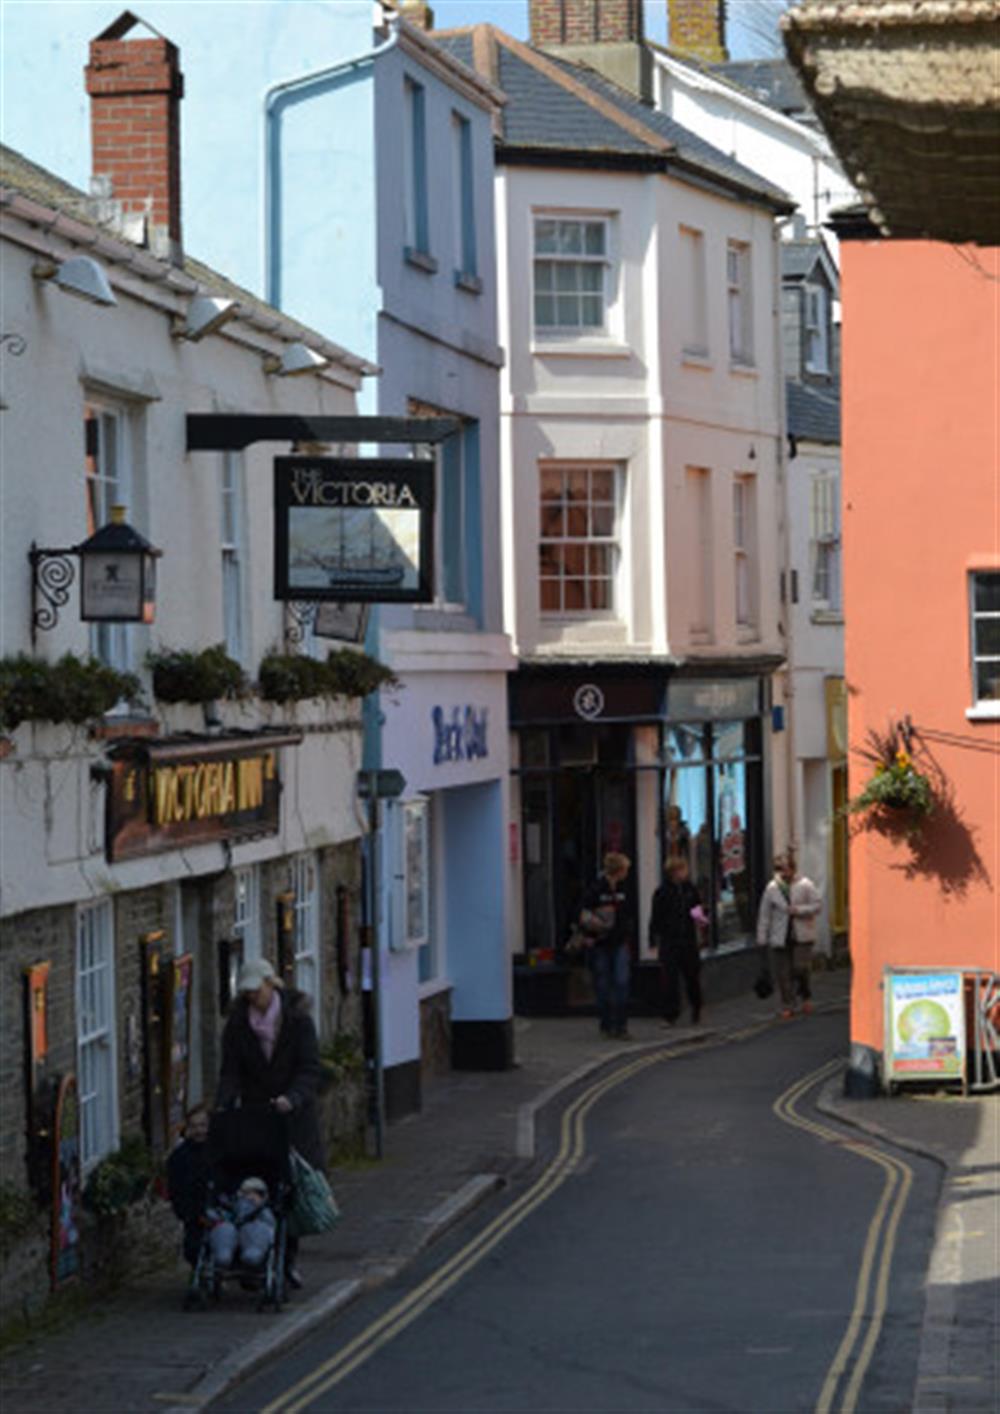 Great pubs and shops within very easy walking distance